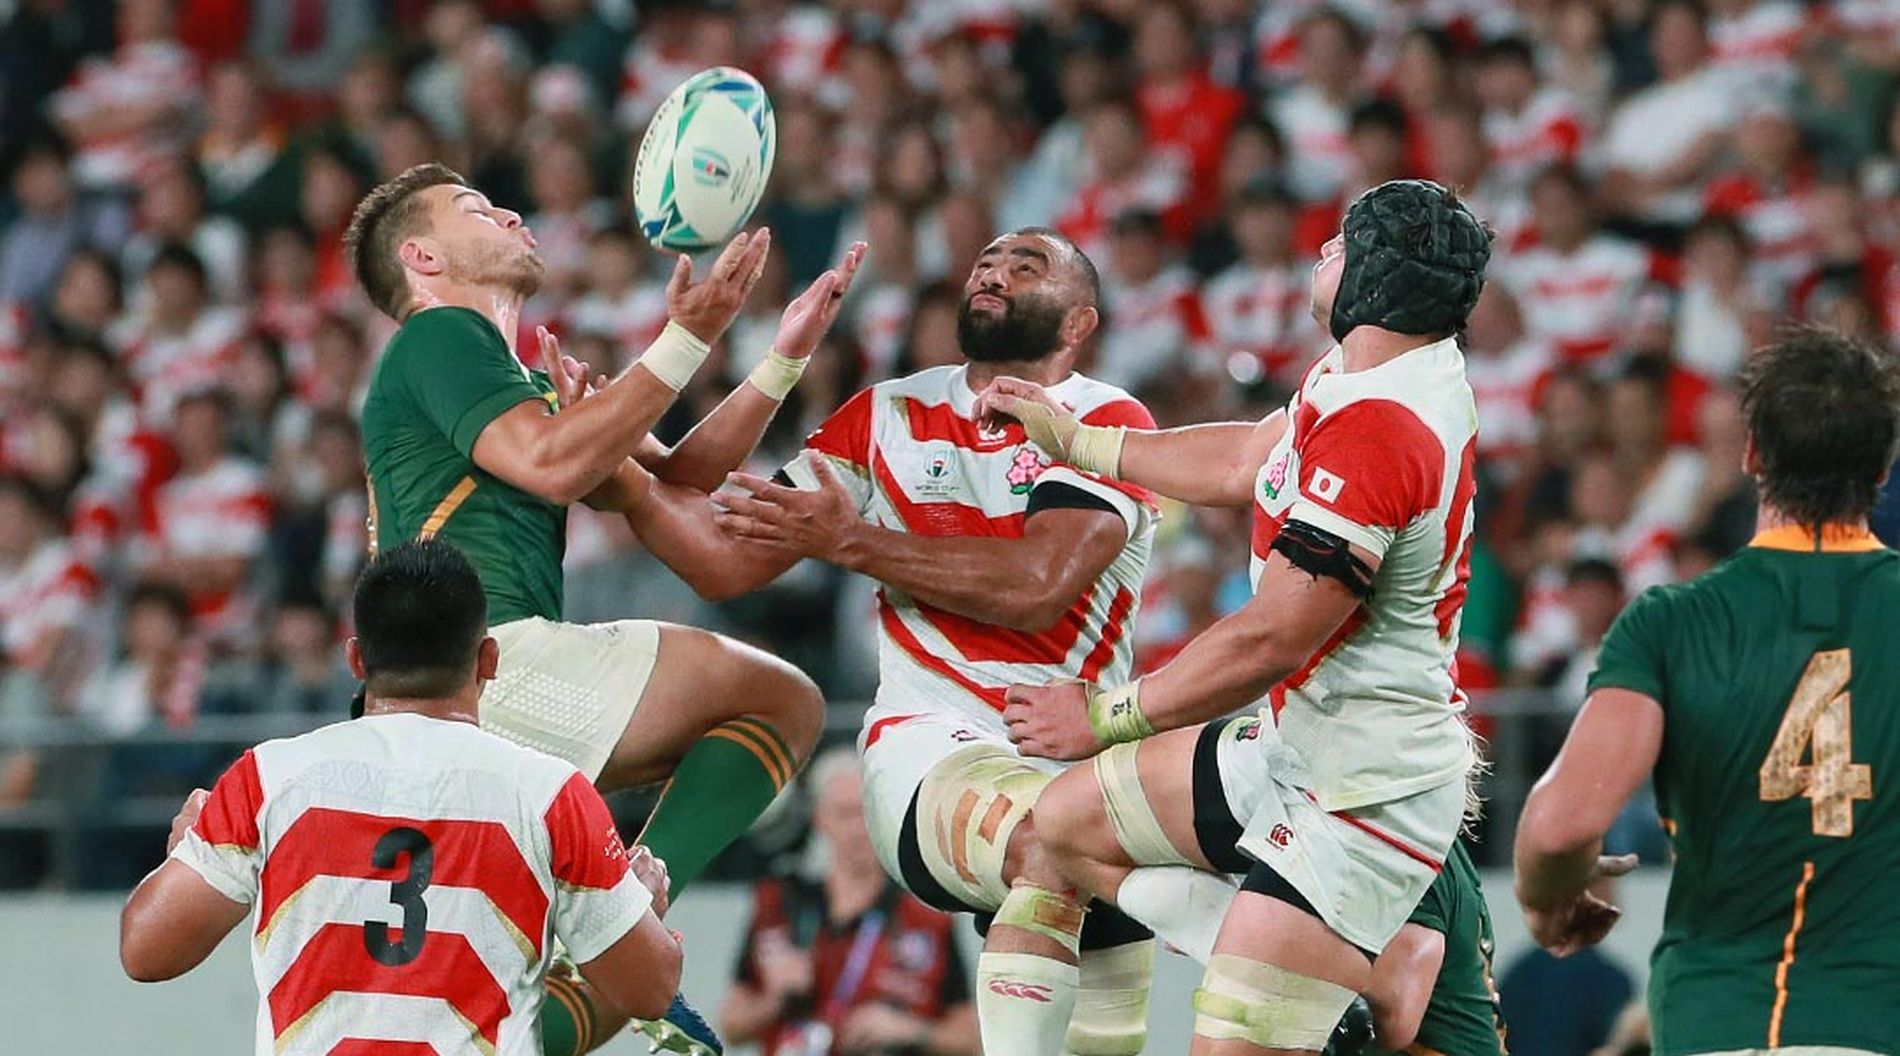 South Africa Ends Japan’s One Team Winning Streak to Move On to 5th RWC Semi-Final